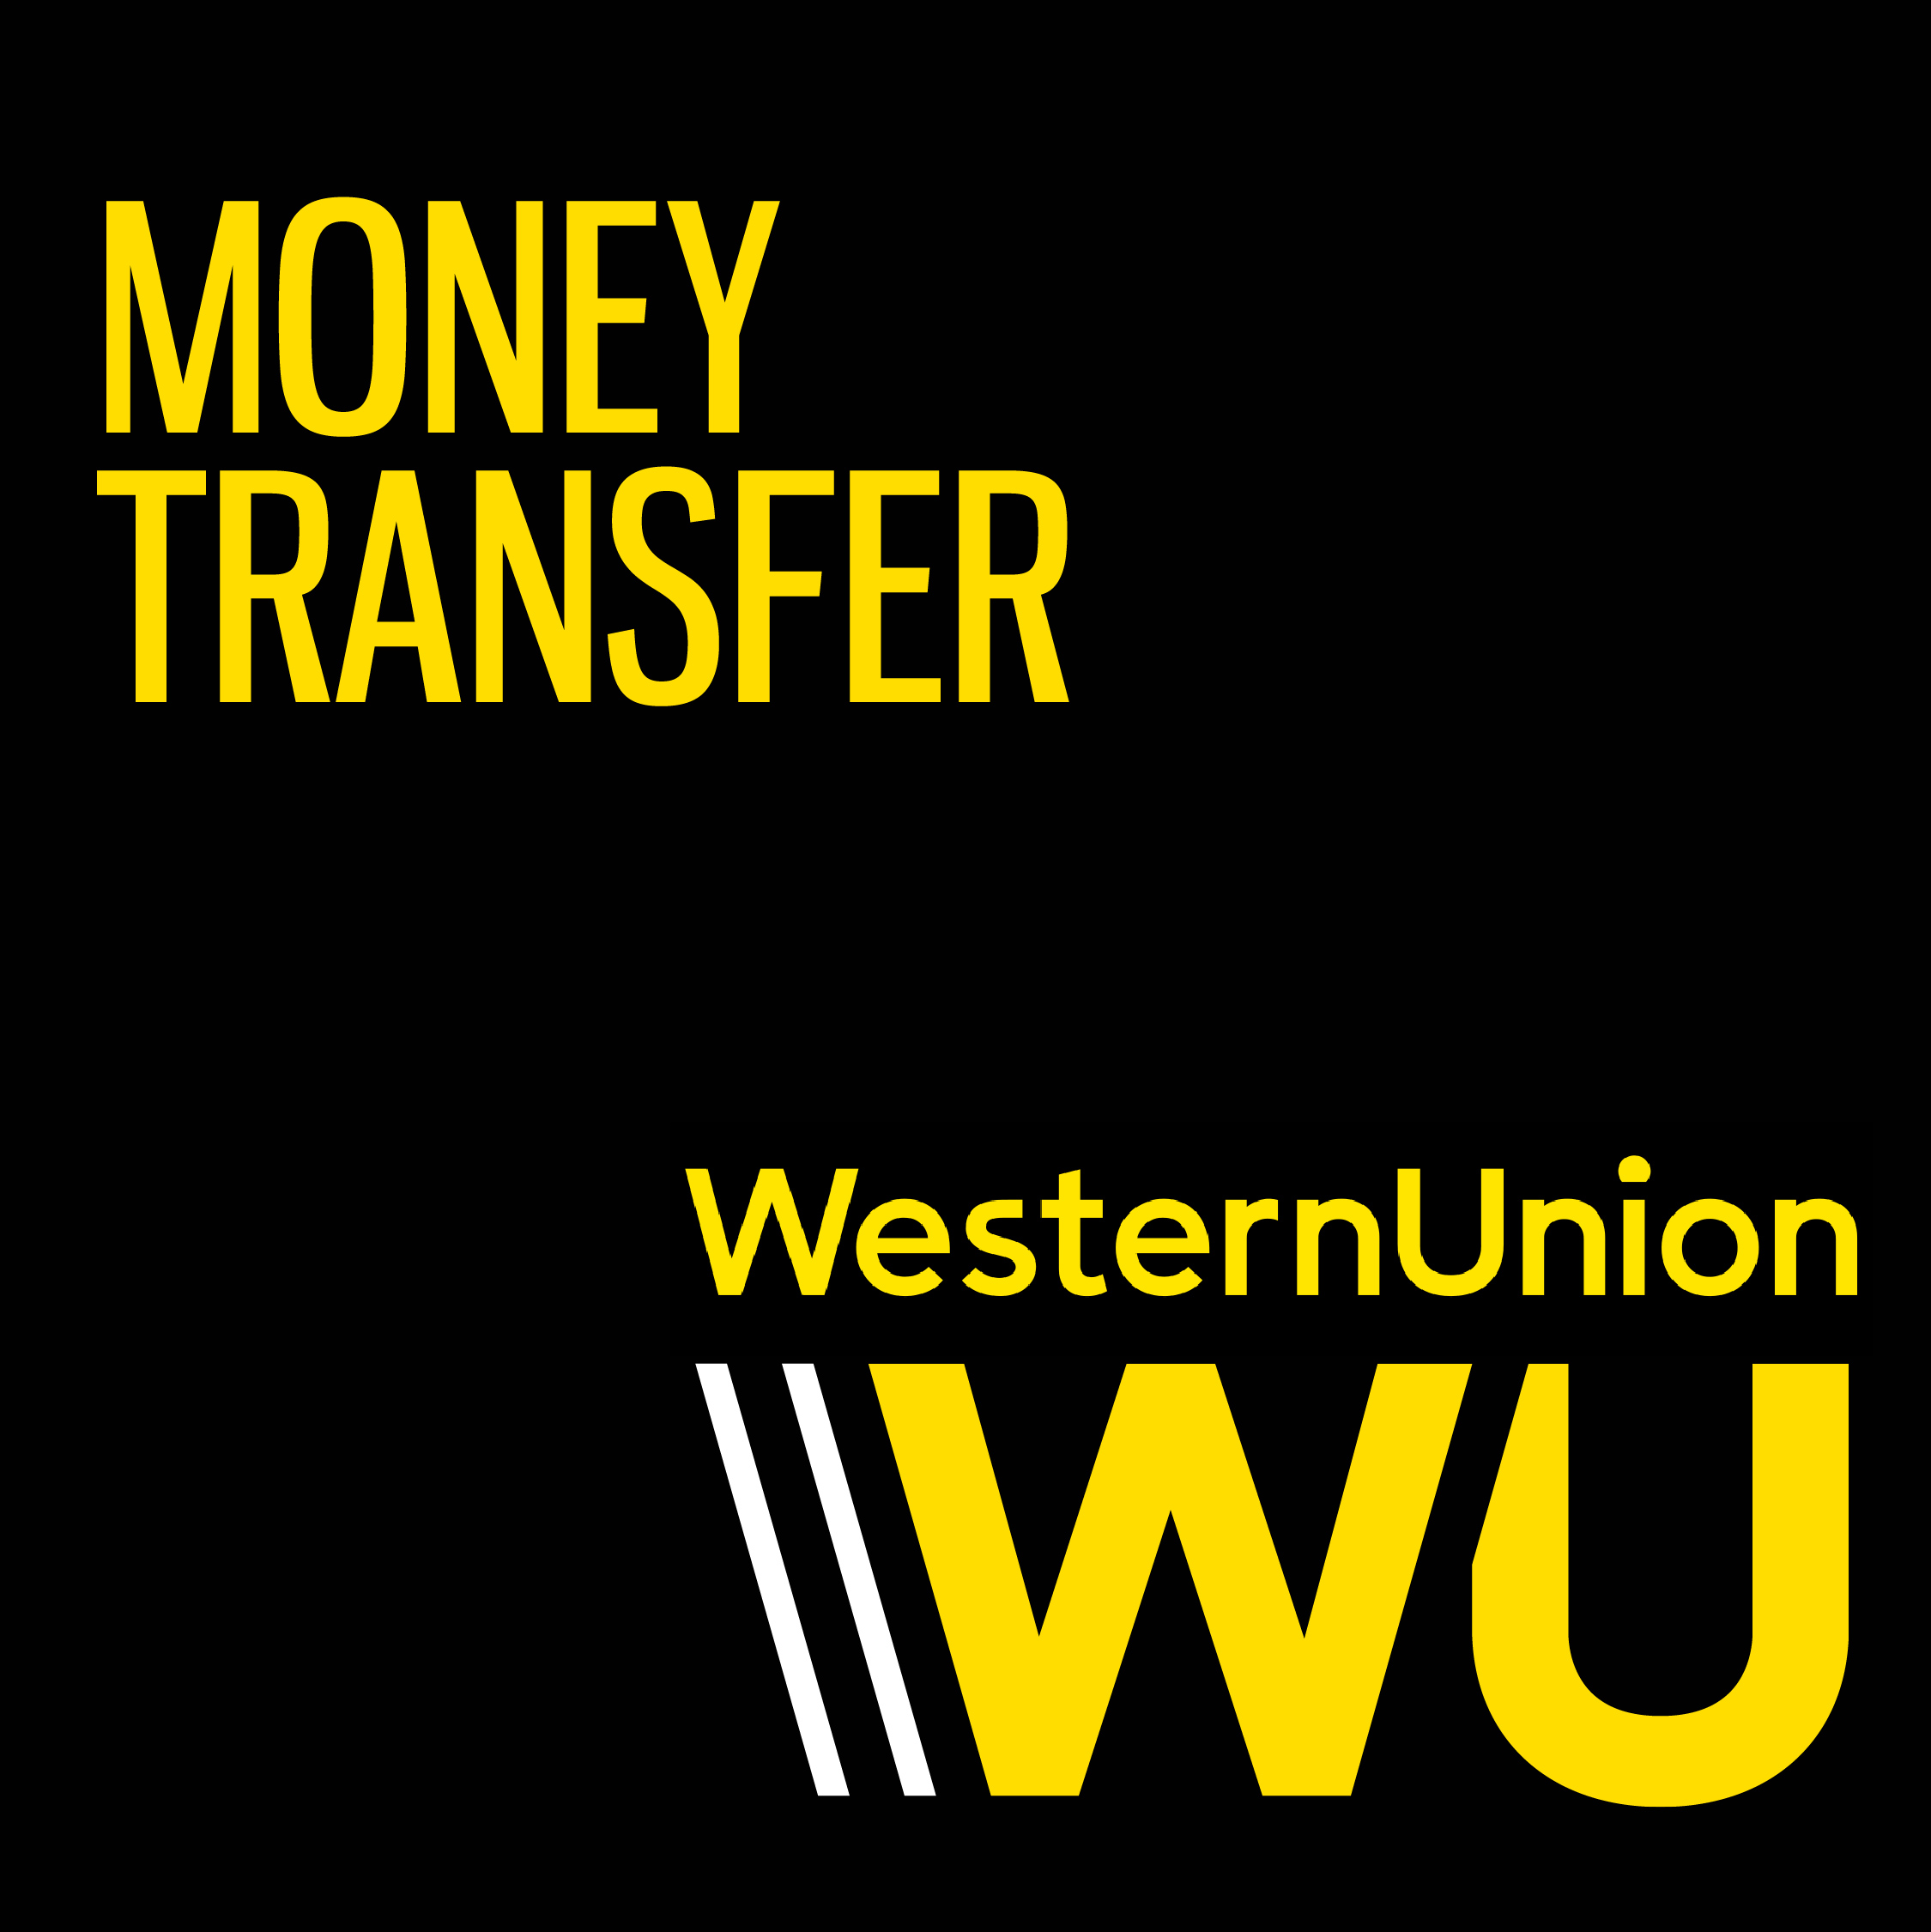 Ringgit to philippine peso exchange rate today western union